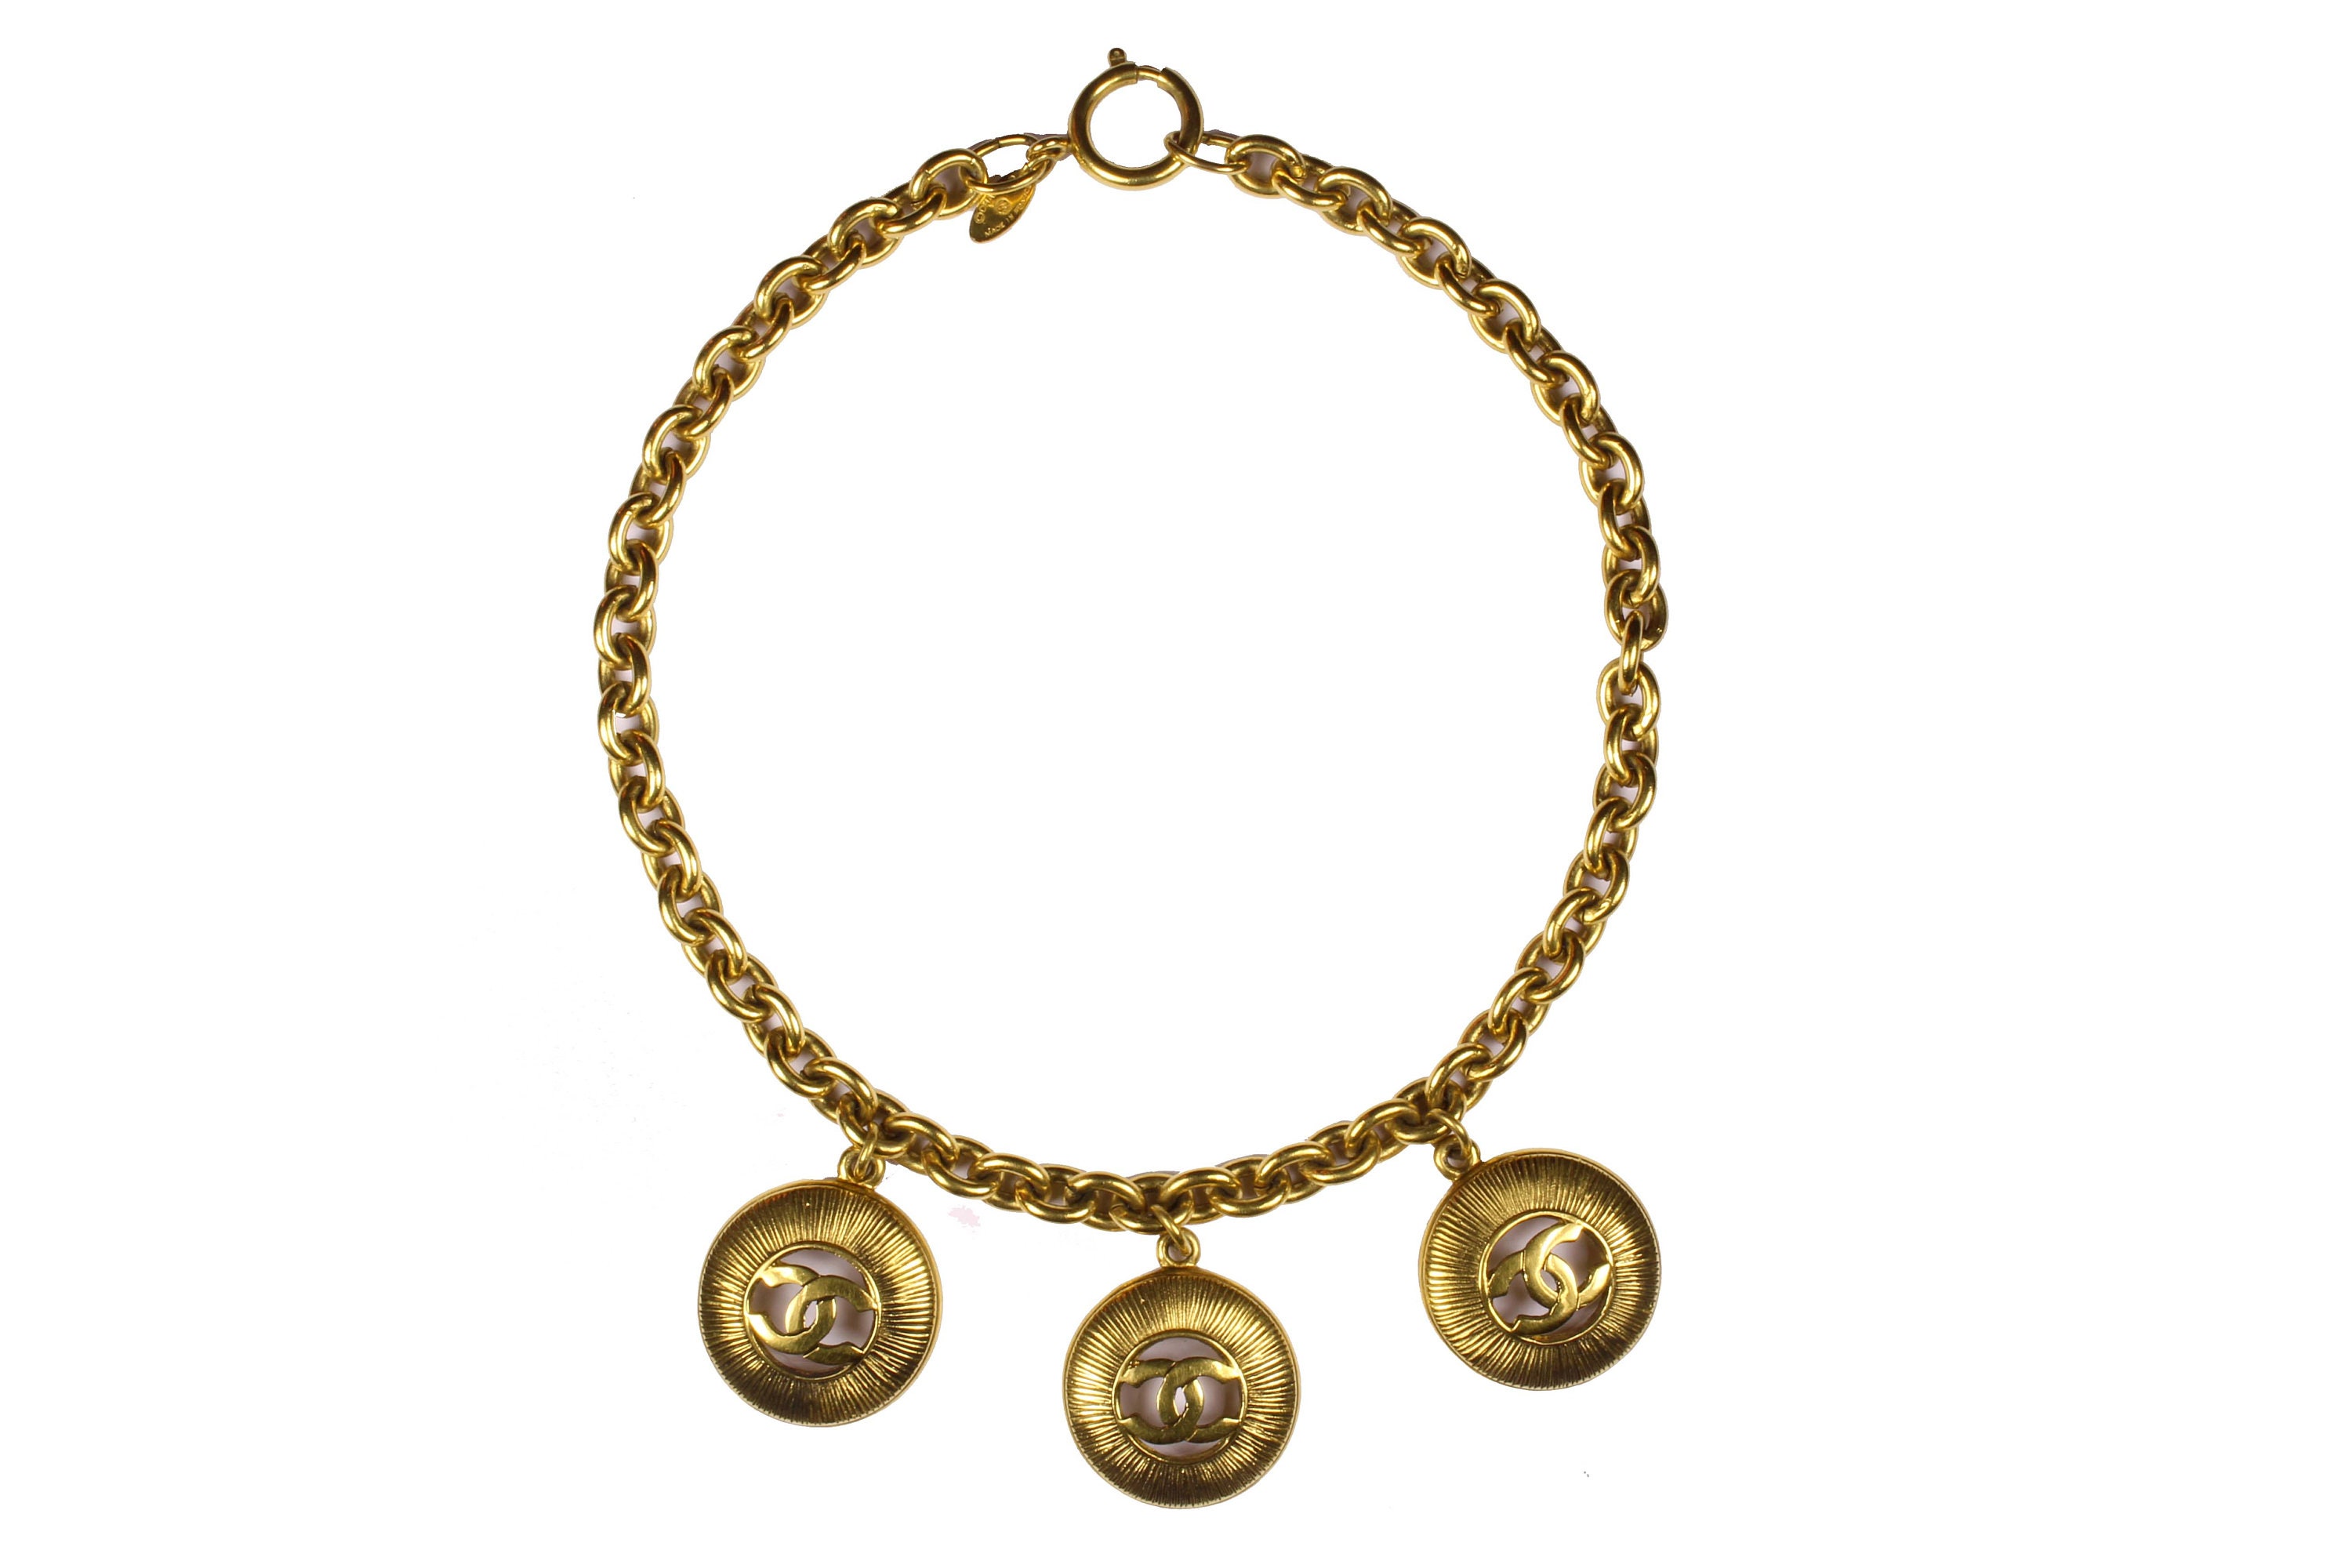 Preowned Chanel Vintage Gold-toned Chain Jewelry Belt ($530